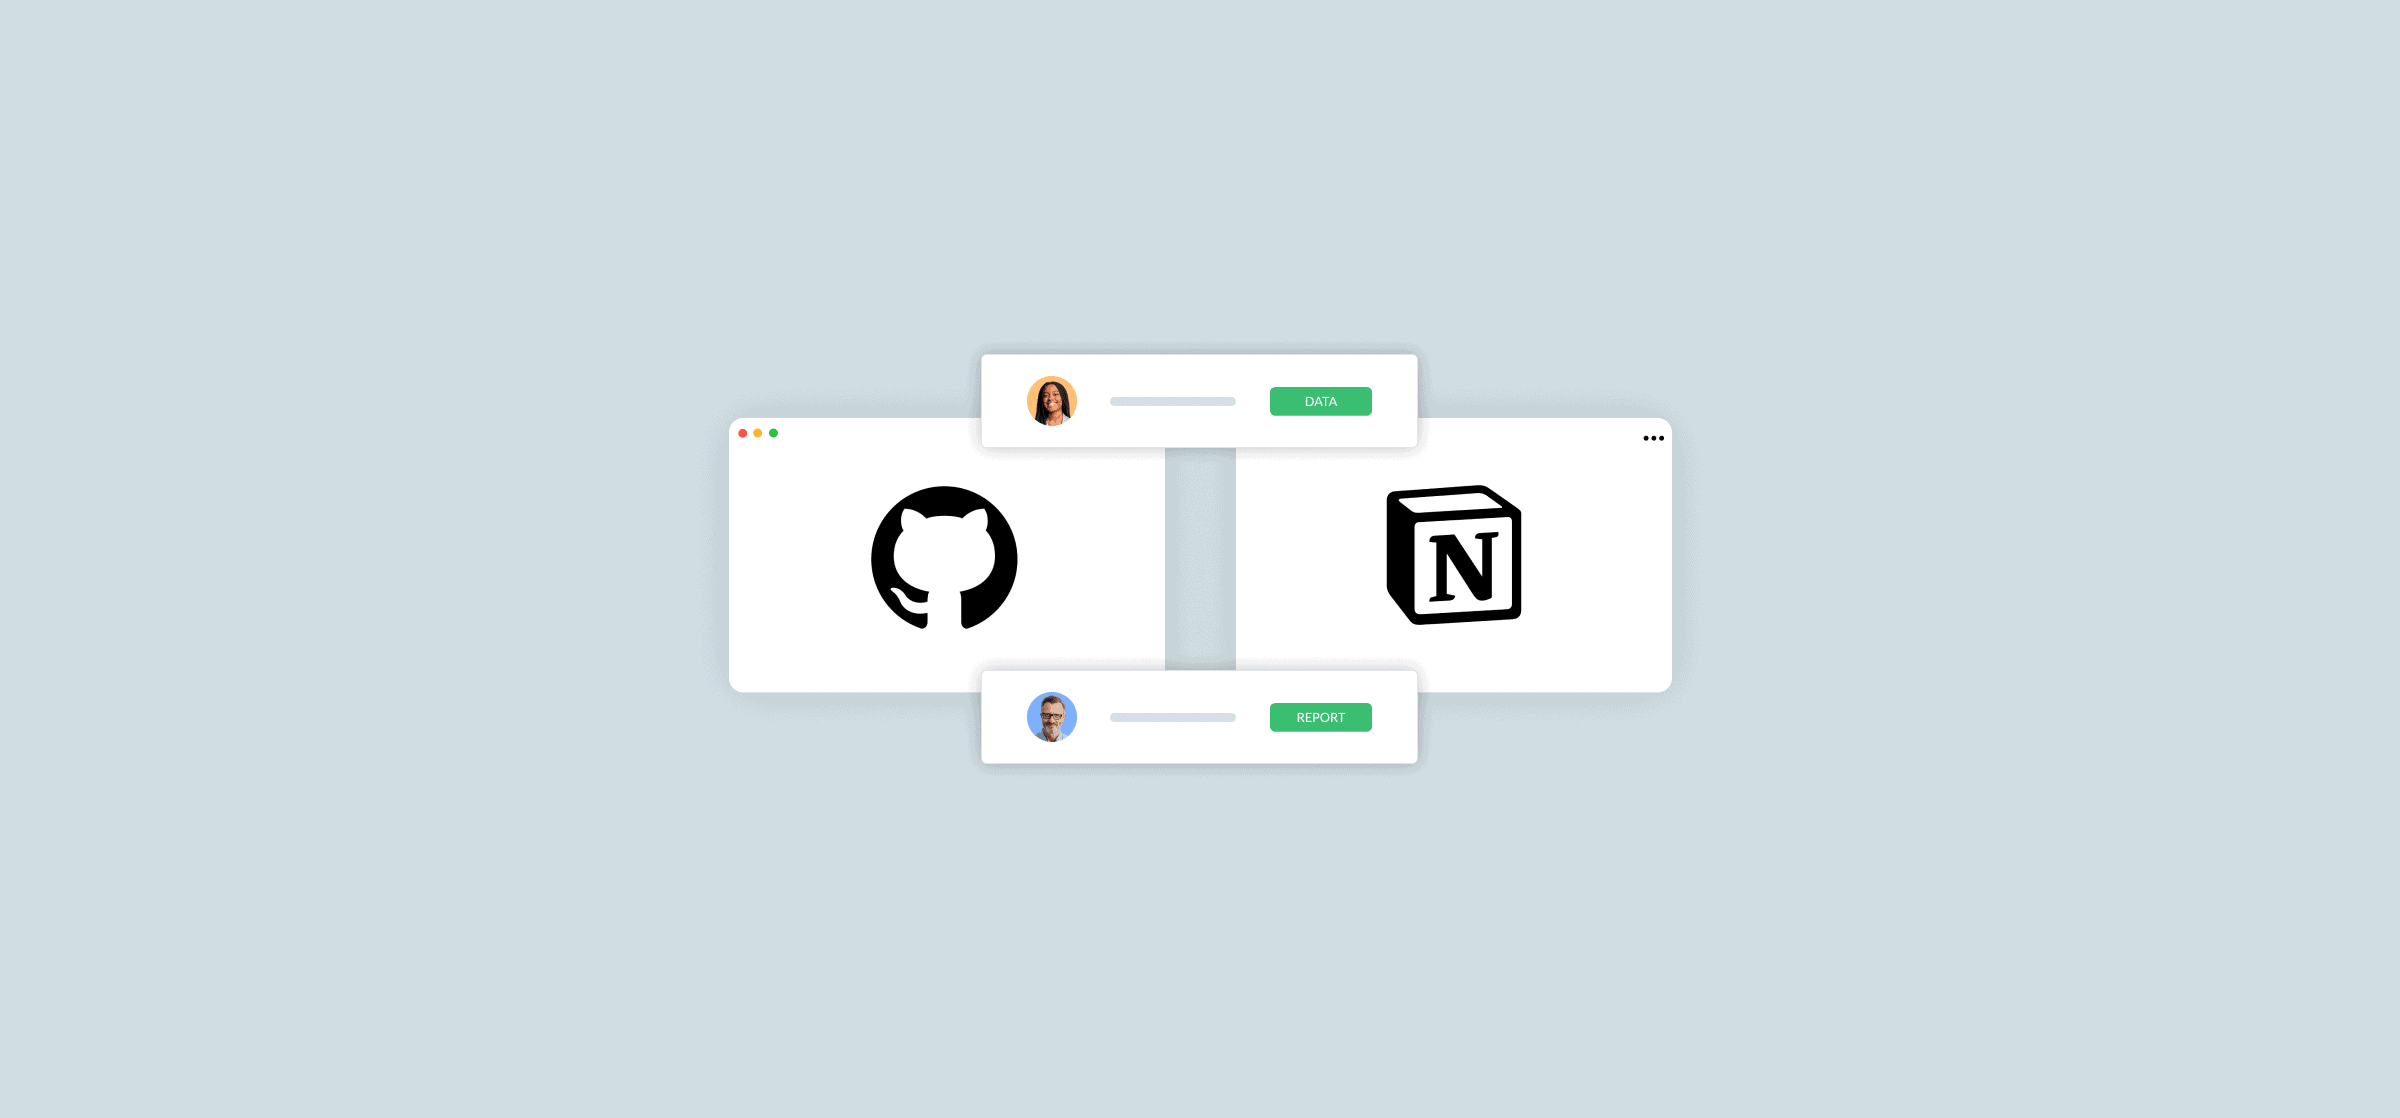 Logos for GitHub and Notion.